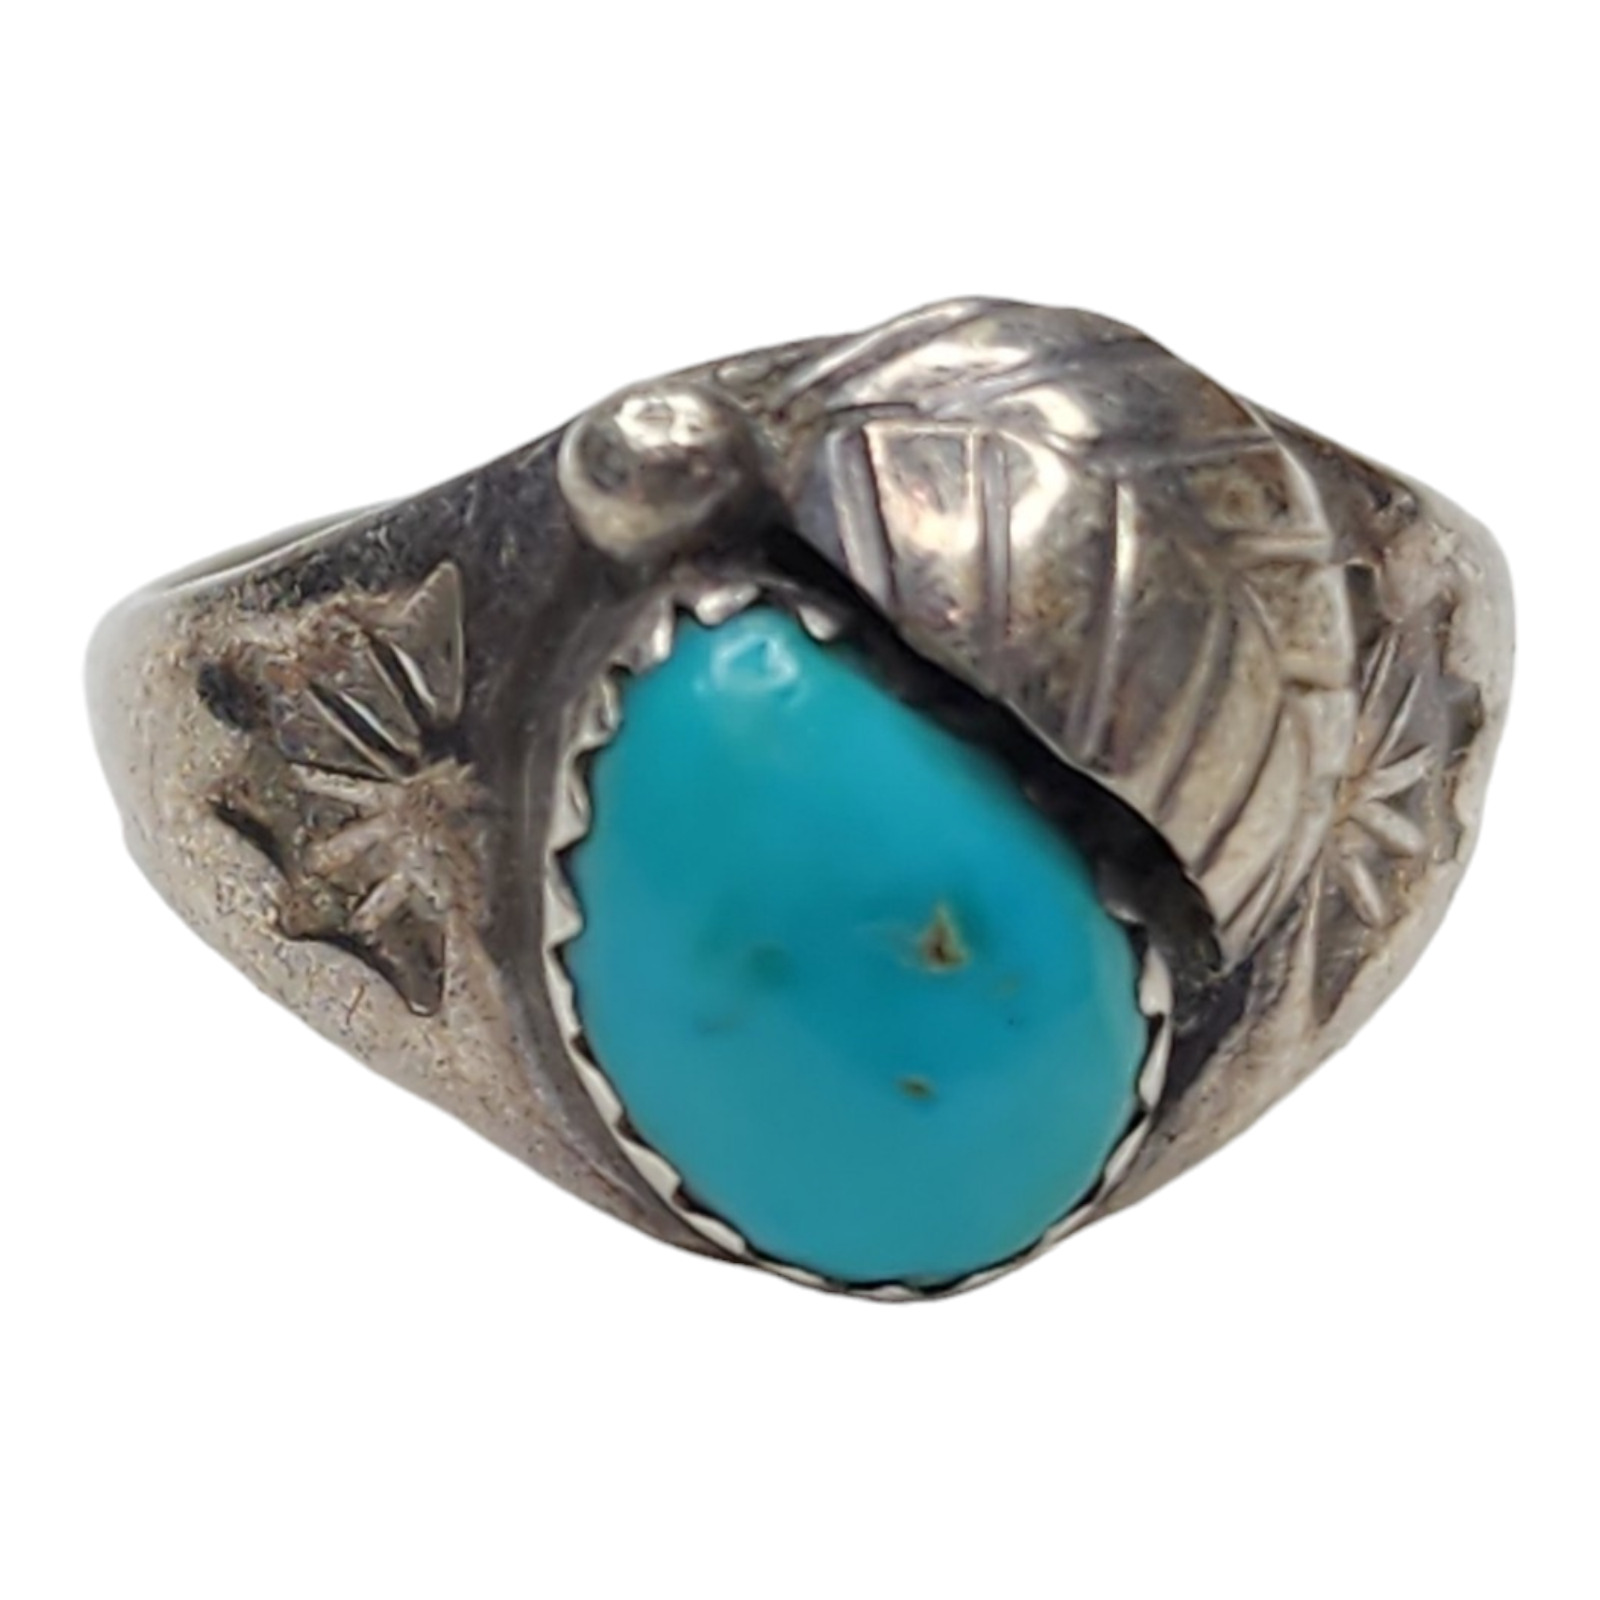 Vintage Native American Navajo Southwest Sterling Silver Turquoise Ring Size 7.5